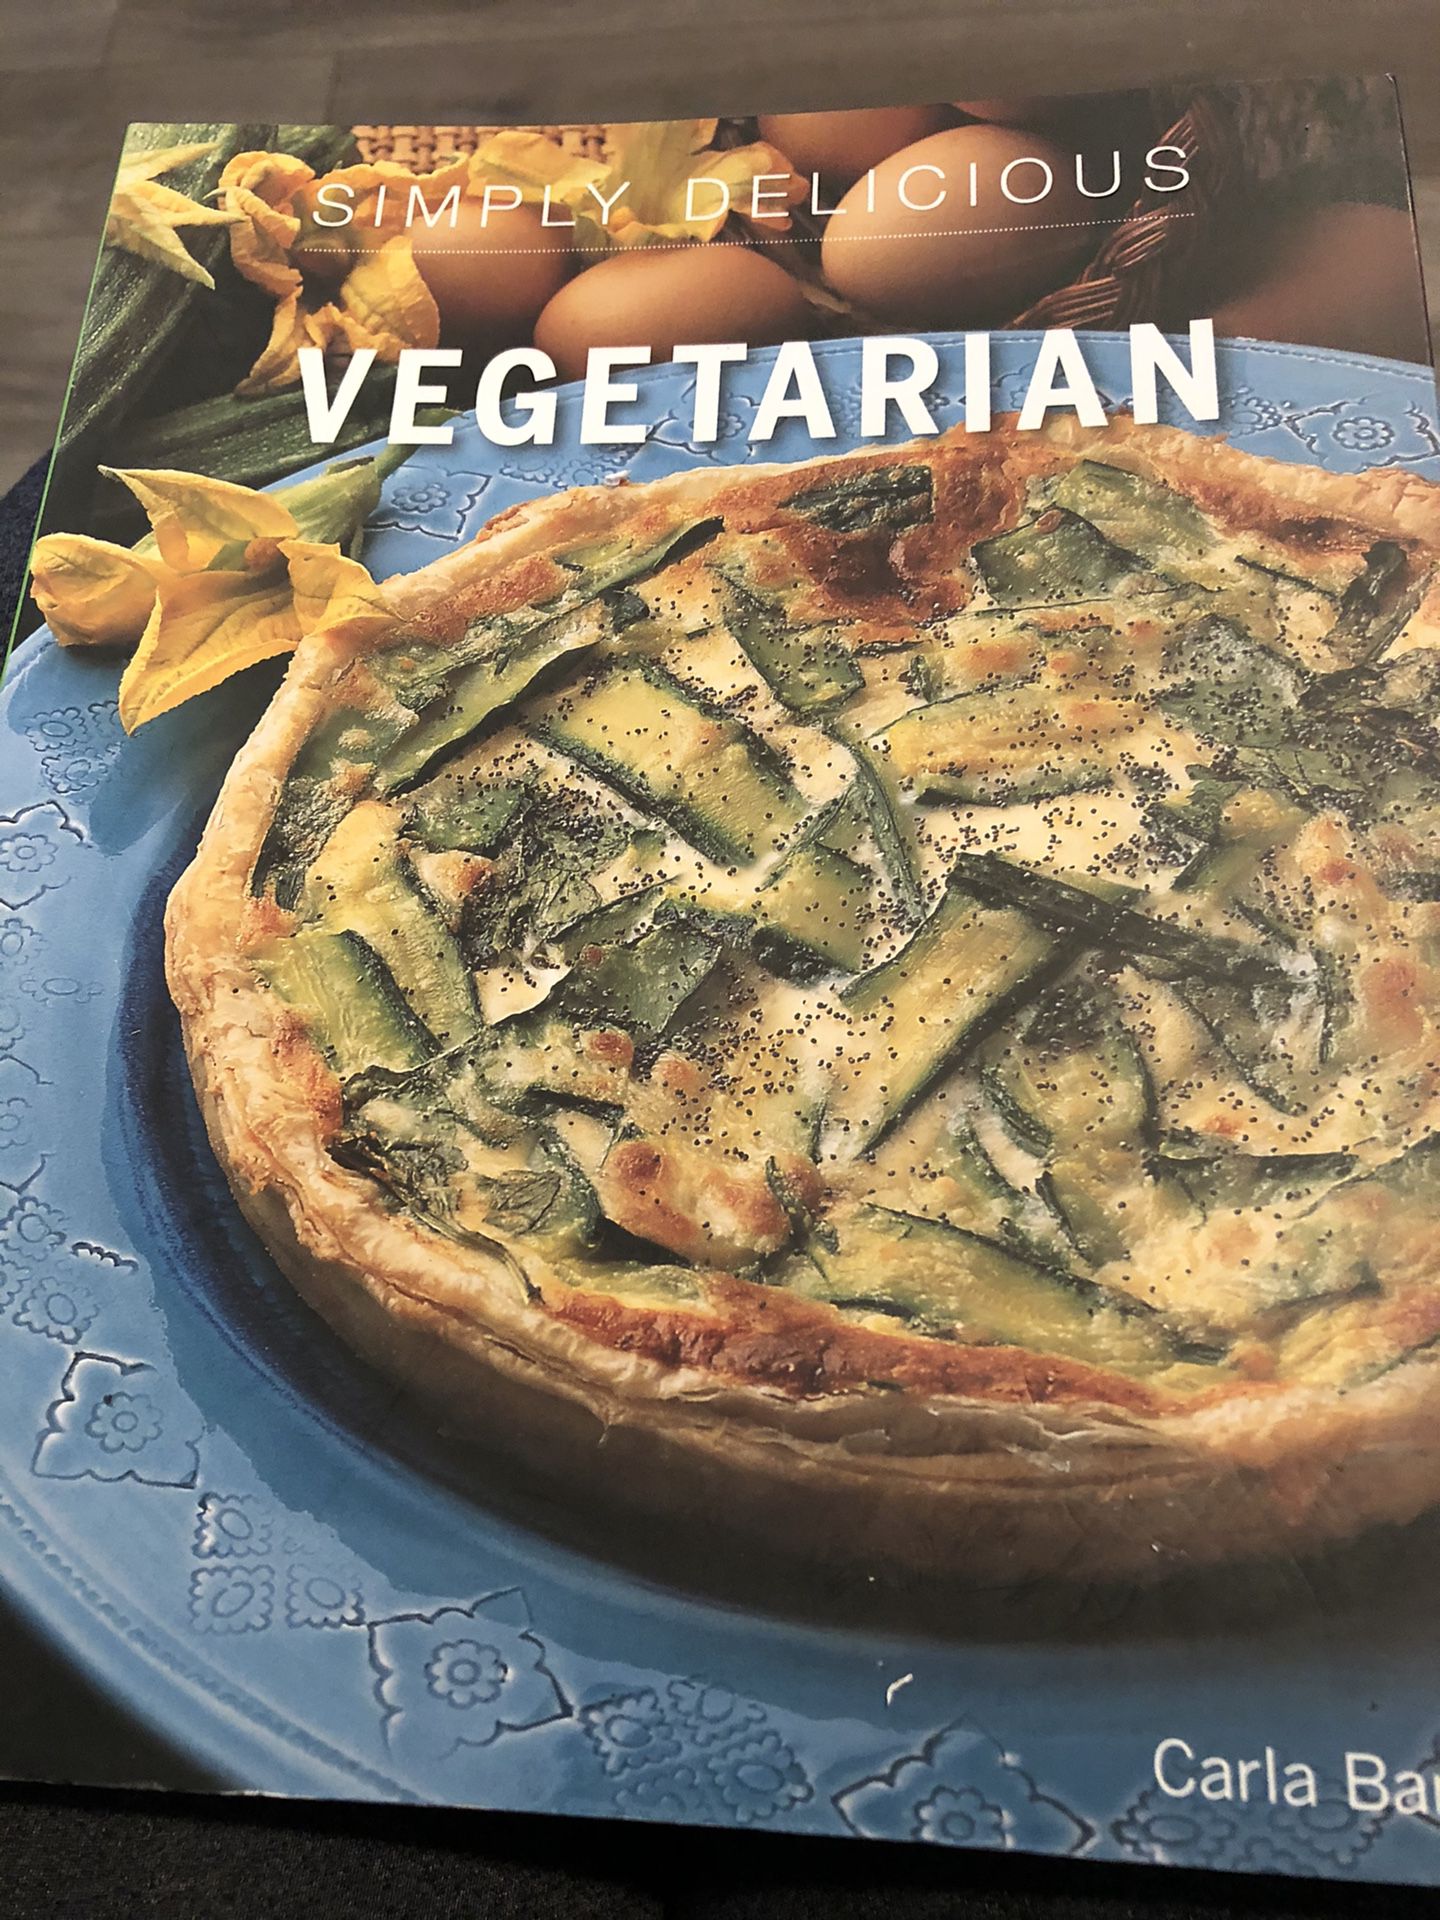 NEW - never used. Simply Delicious Vegetarian Cookbook